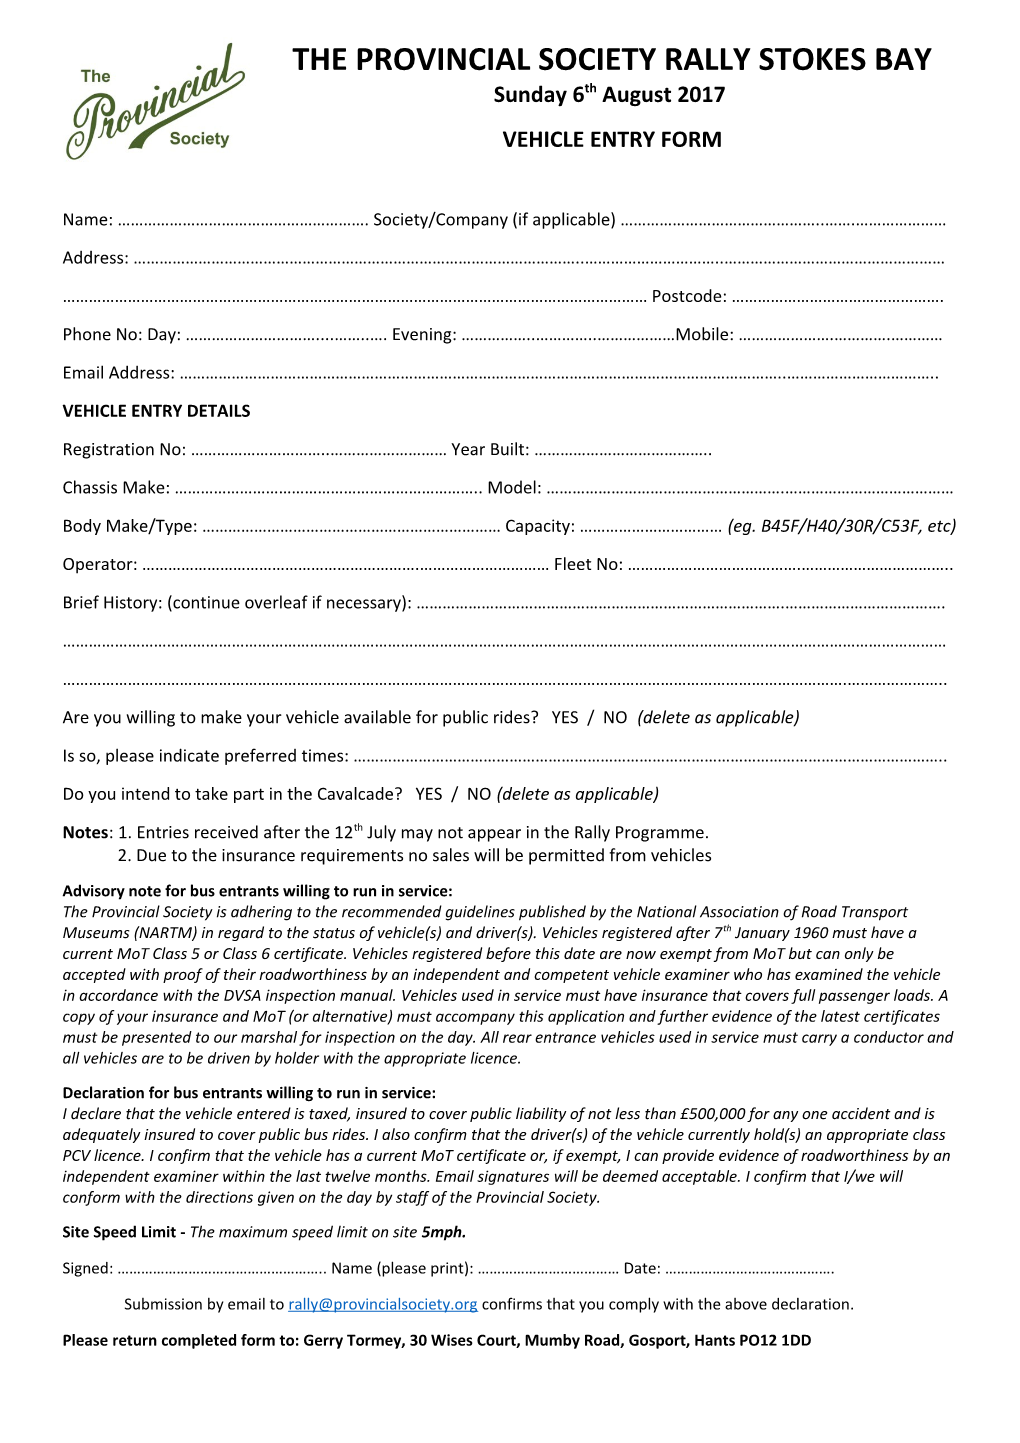 Vehicle Entry Form